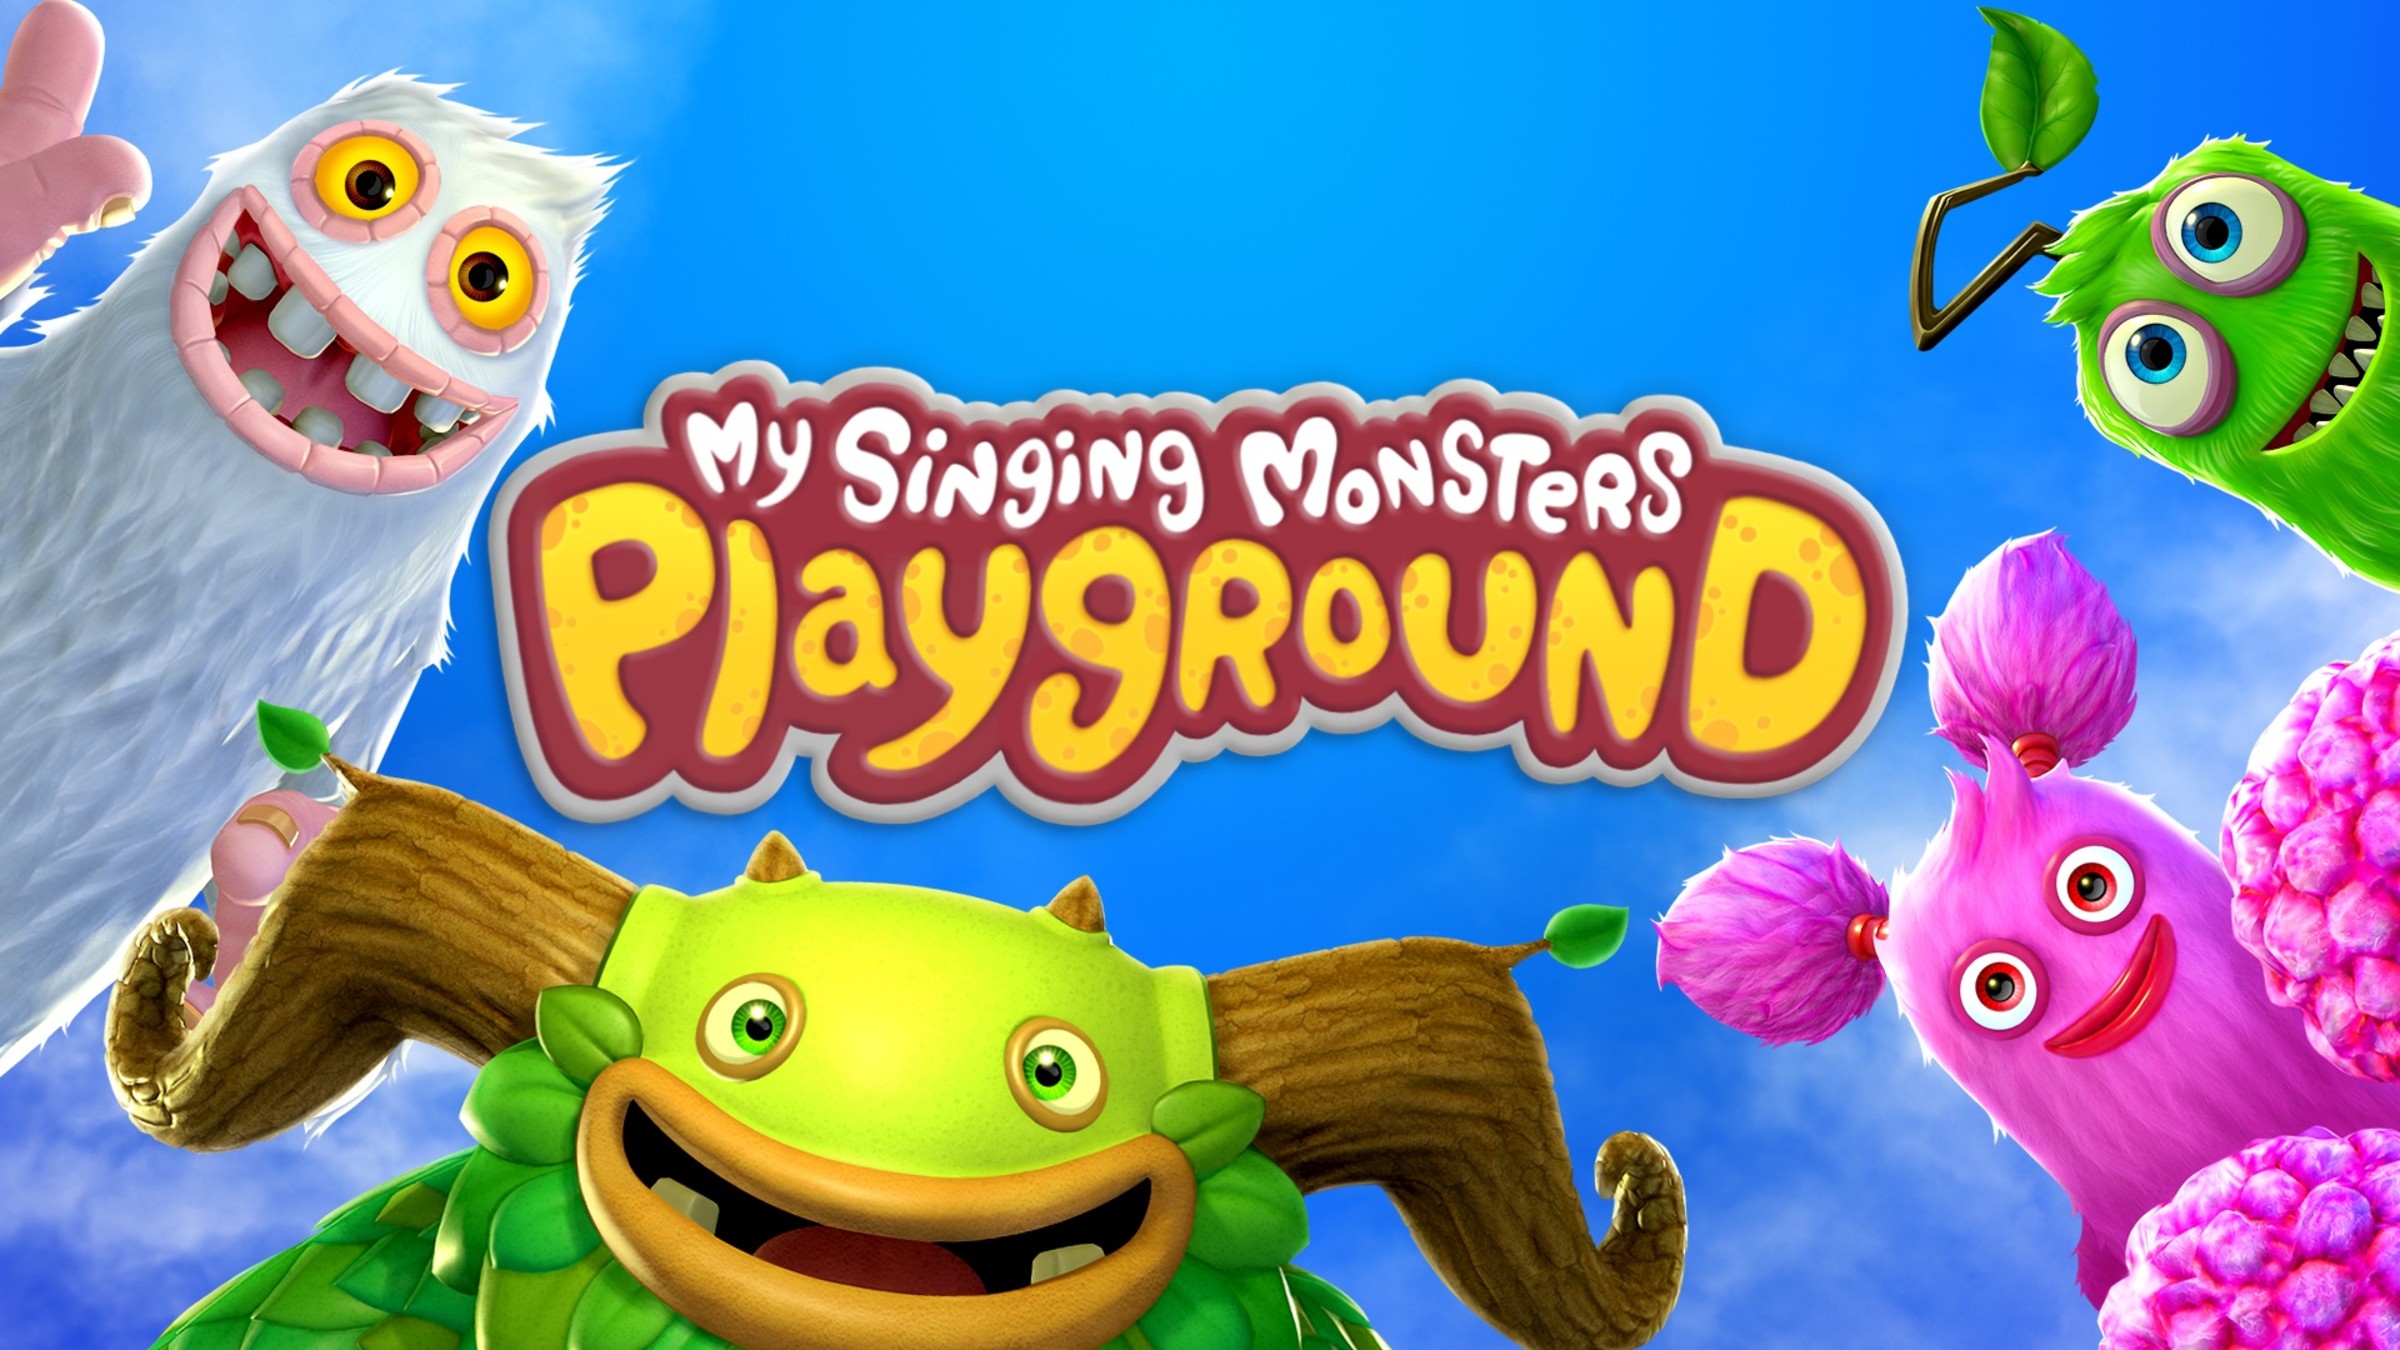 My Singing Monsters Playground For Nintendo Switch - Nintendo Official Site